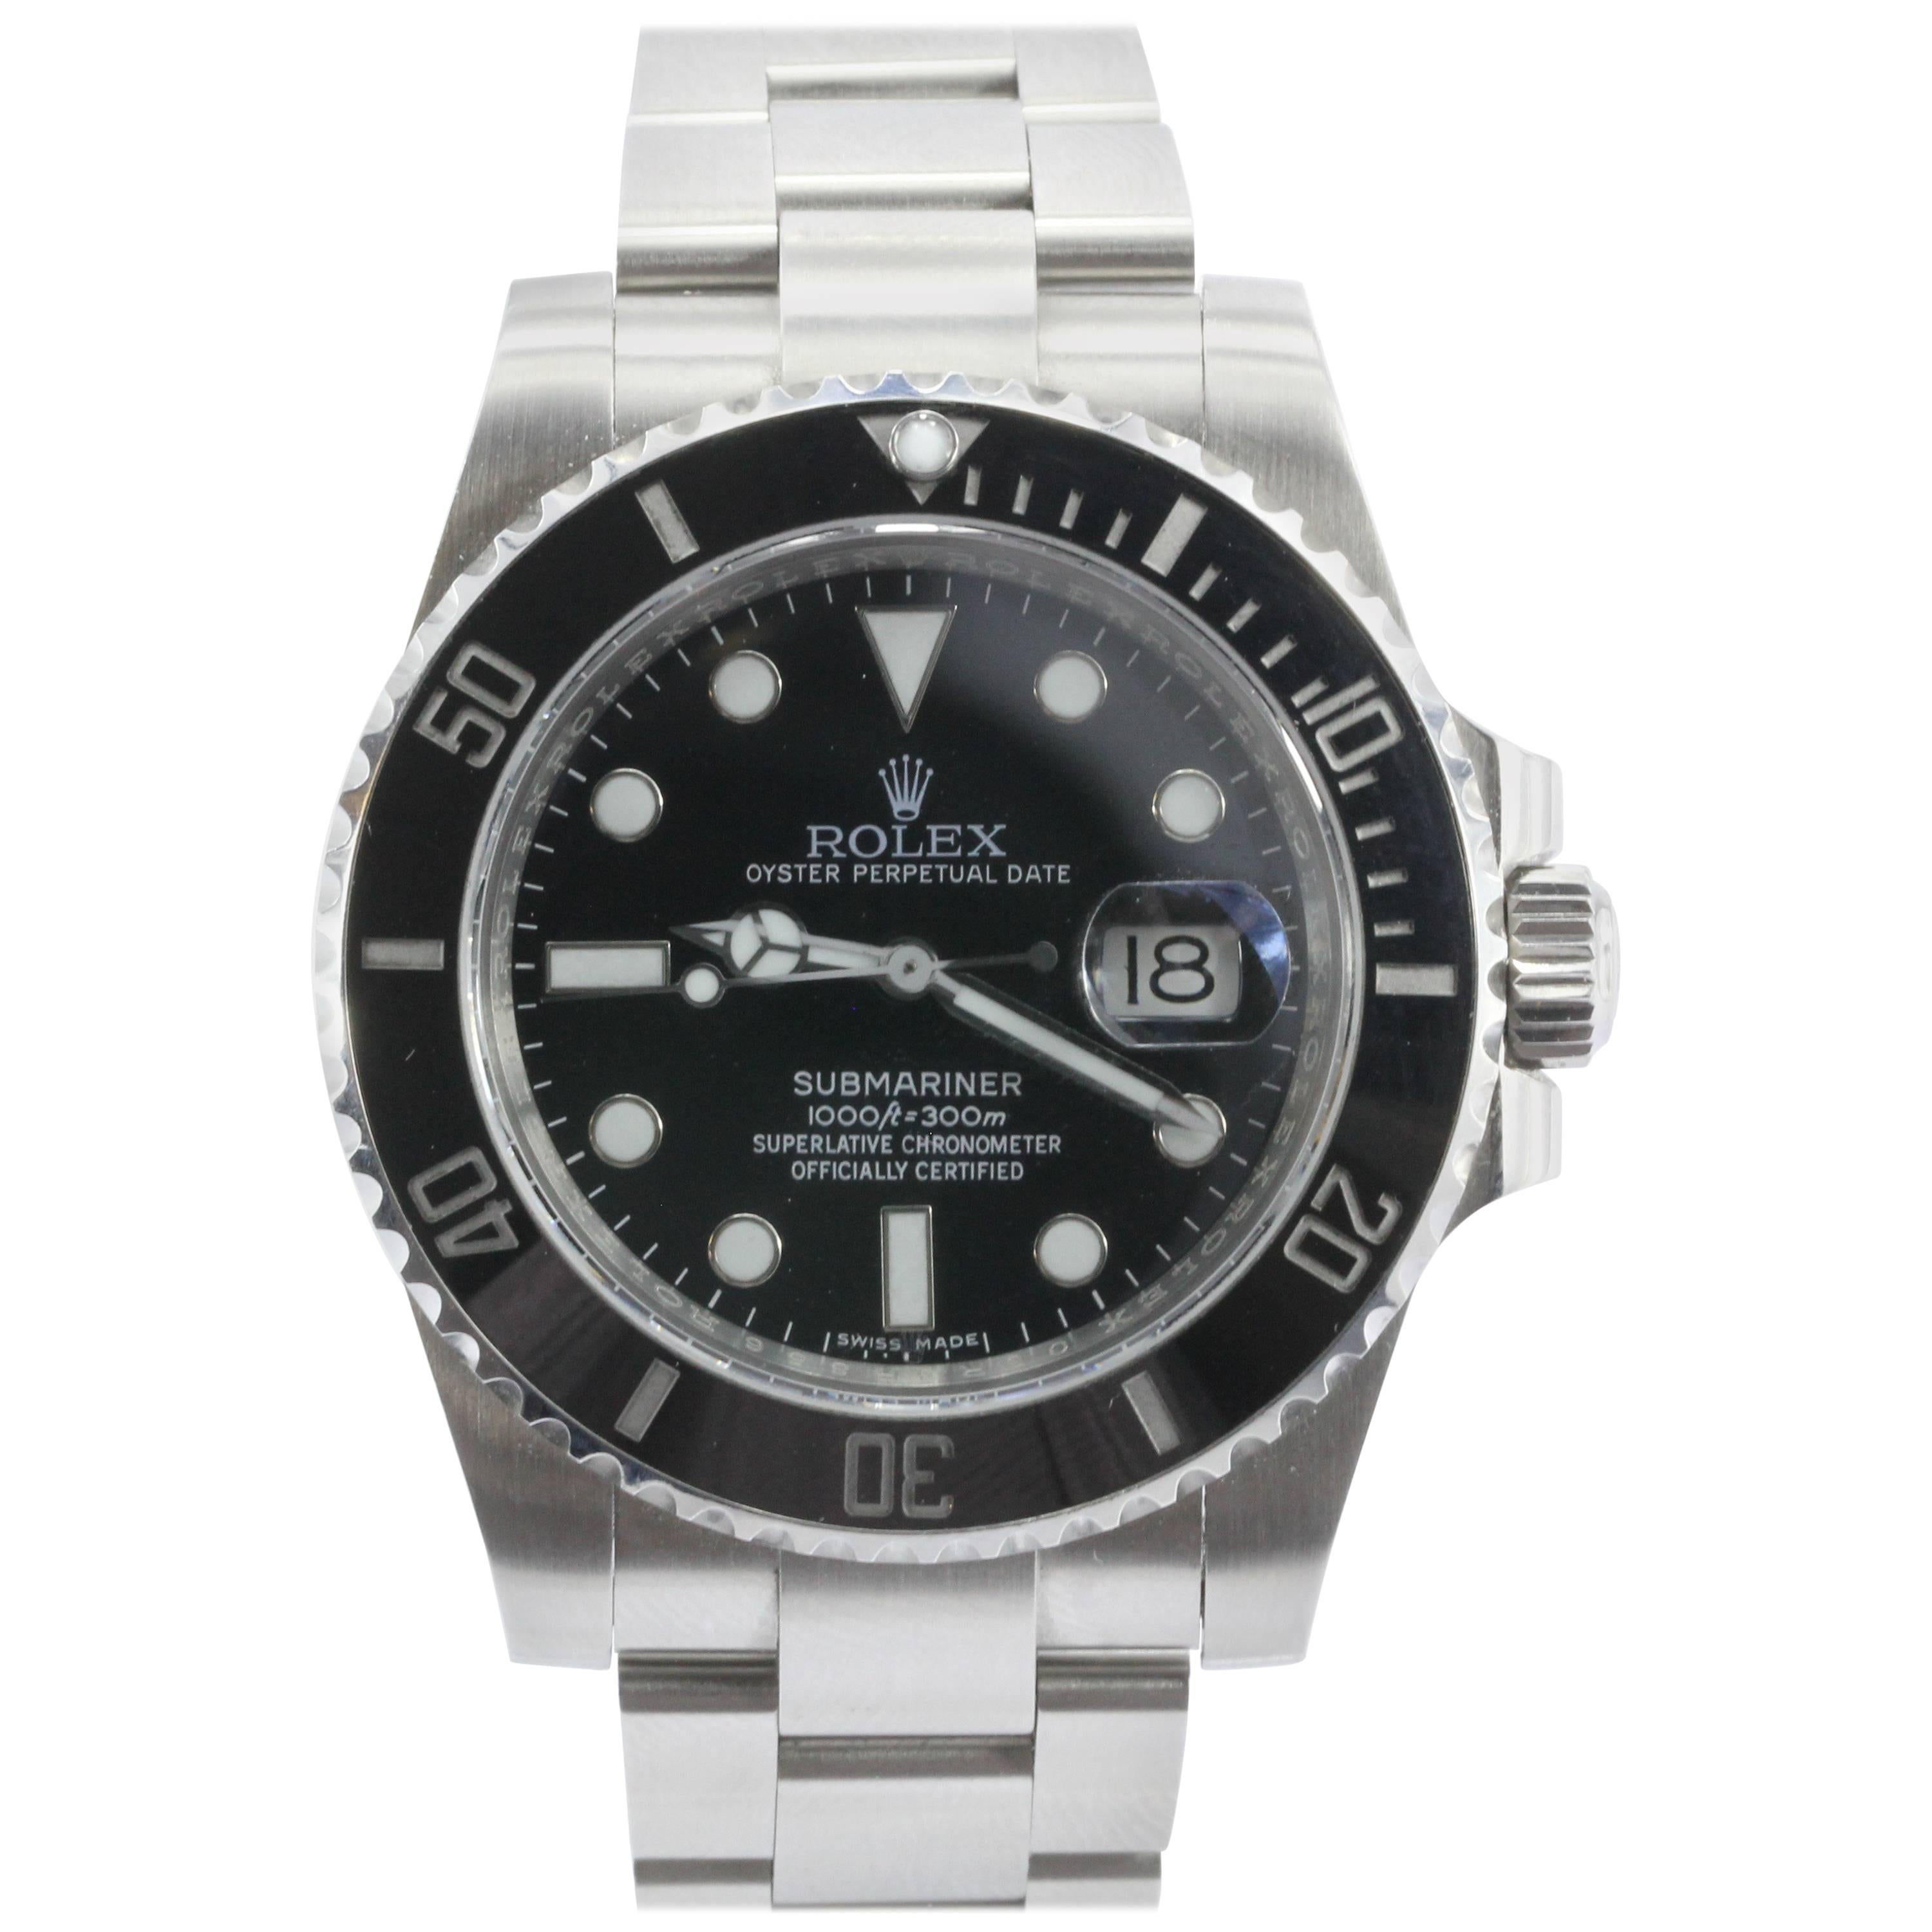 Rolex Steel Submariner Oyster Perpetual Date Black Dial Automatic Wristwatch 